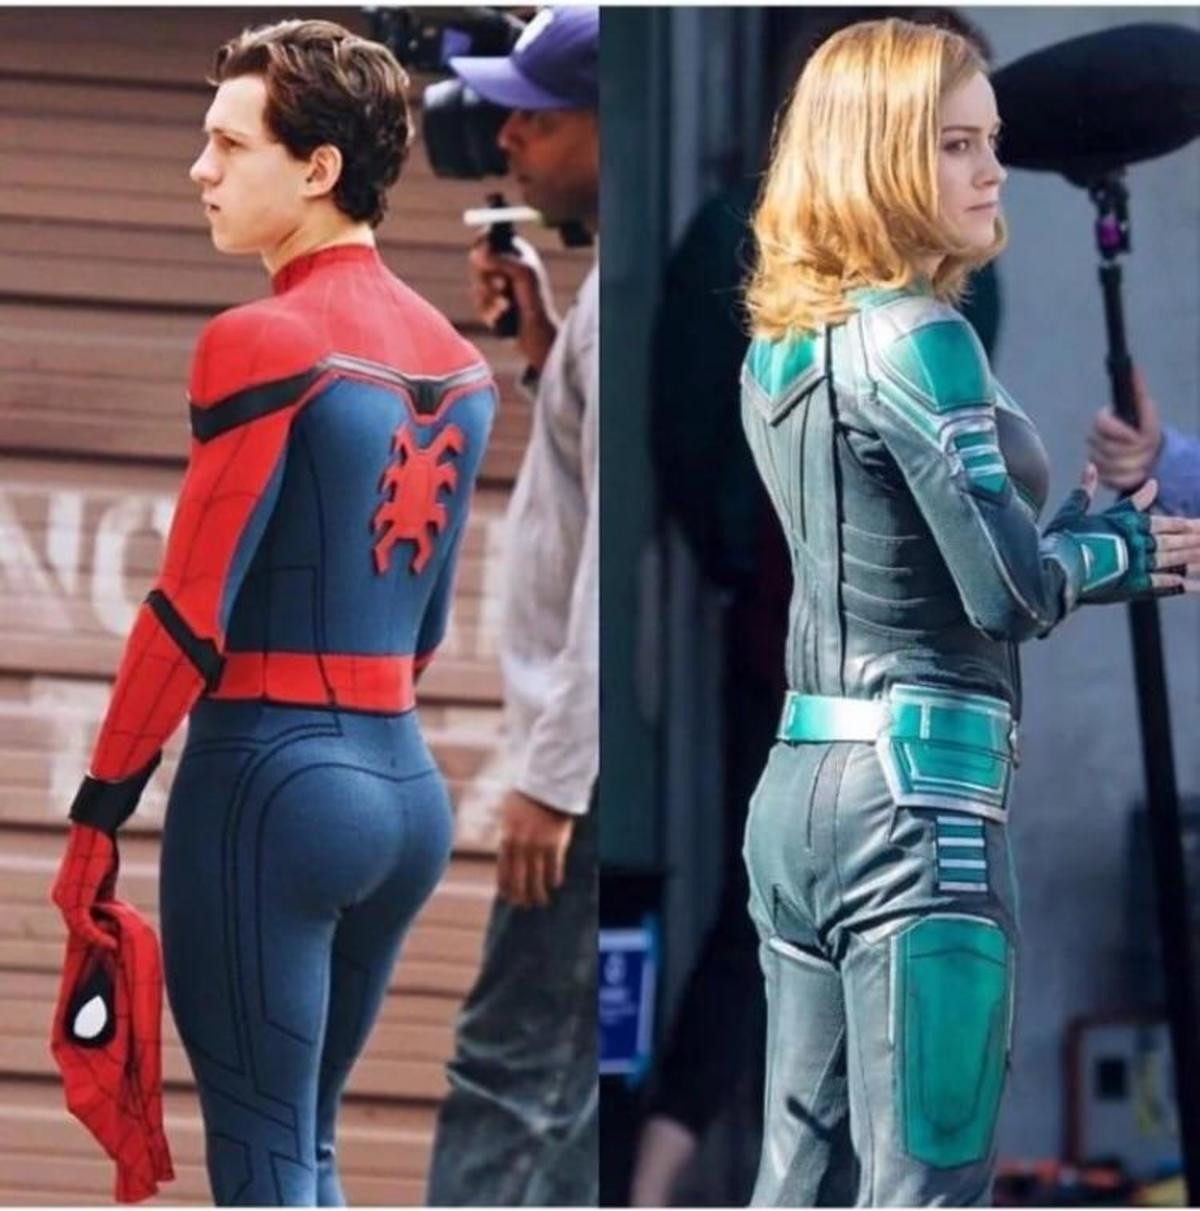 Who has the perfect ass